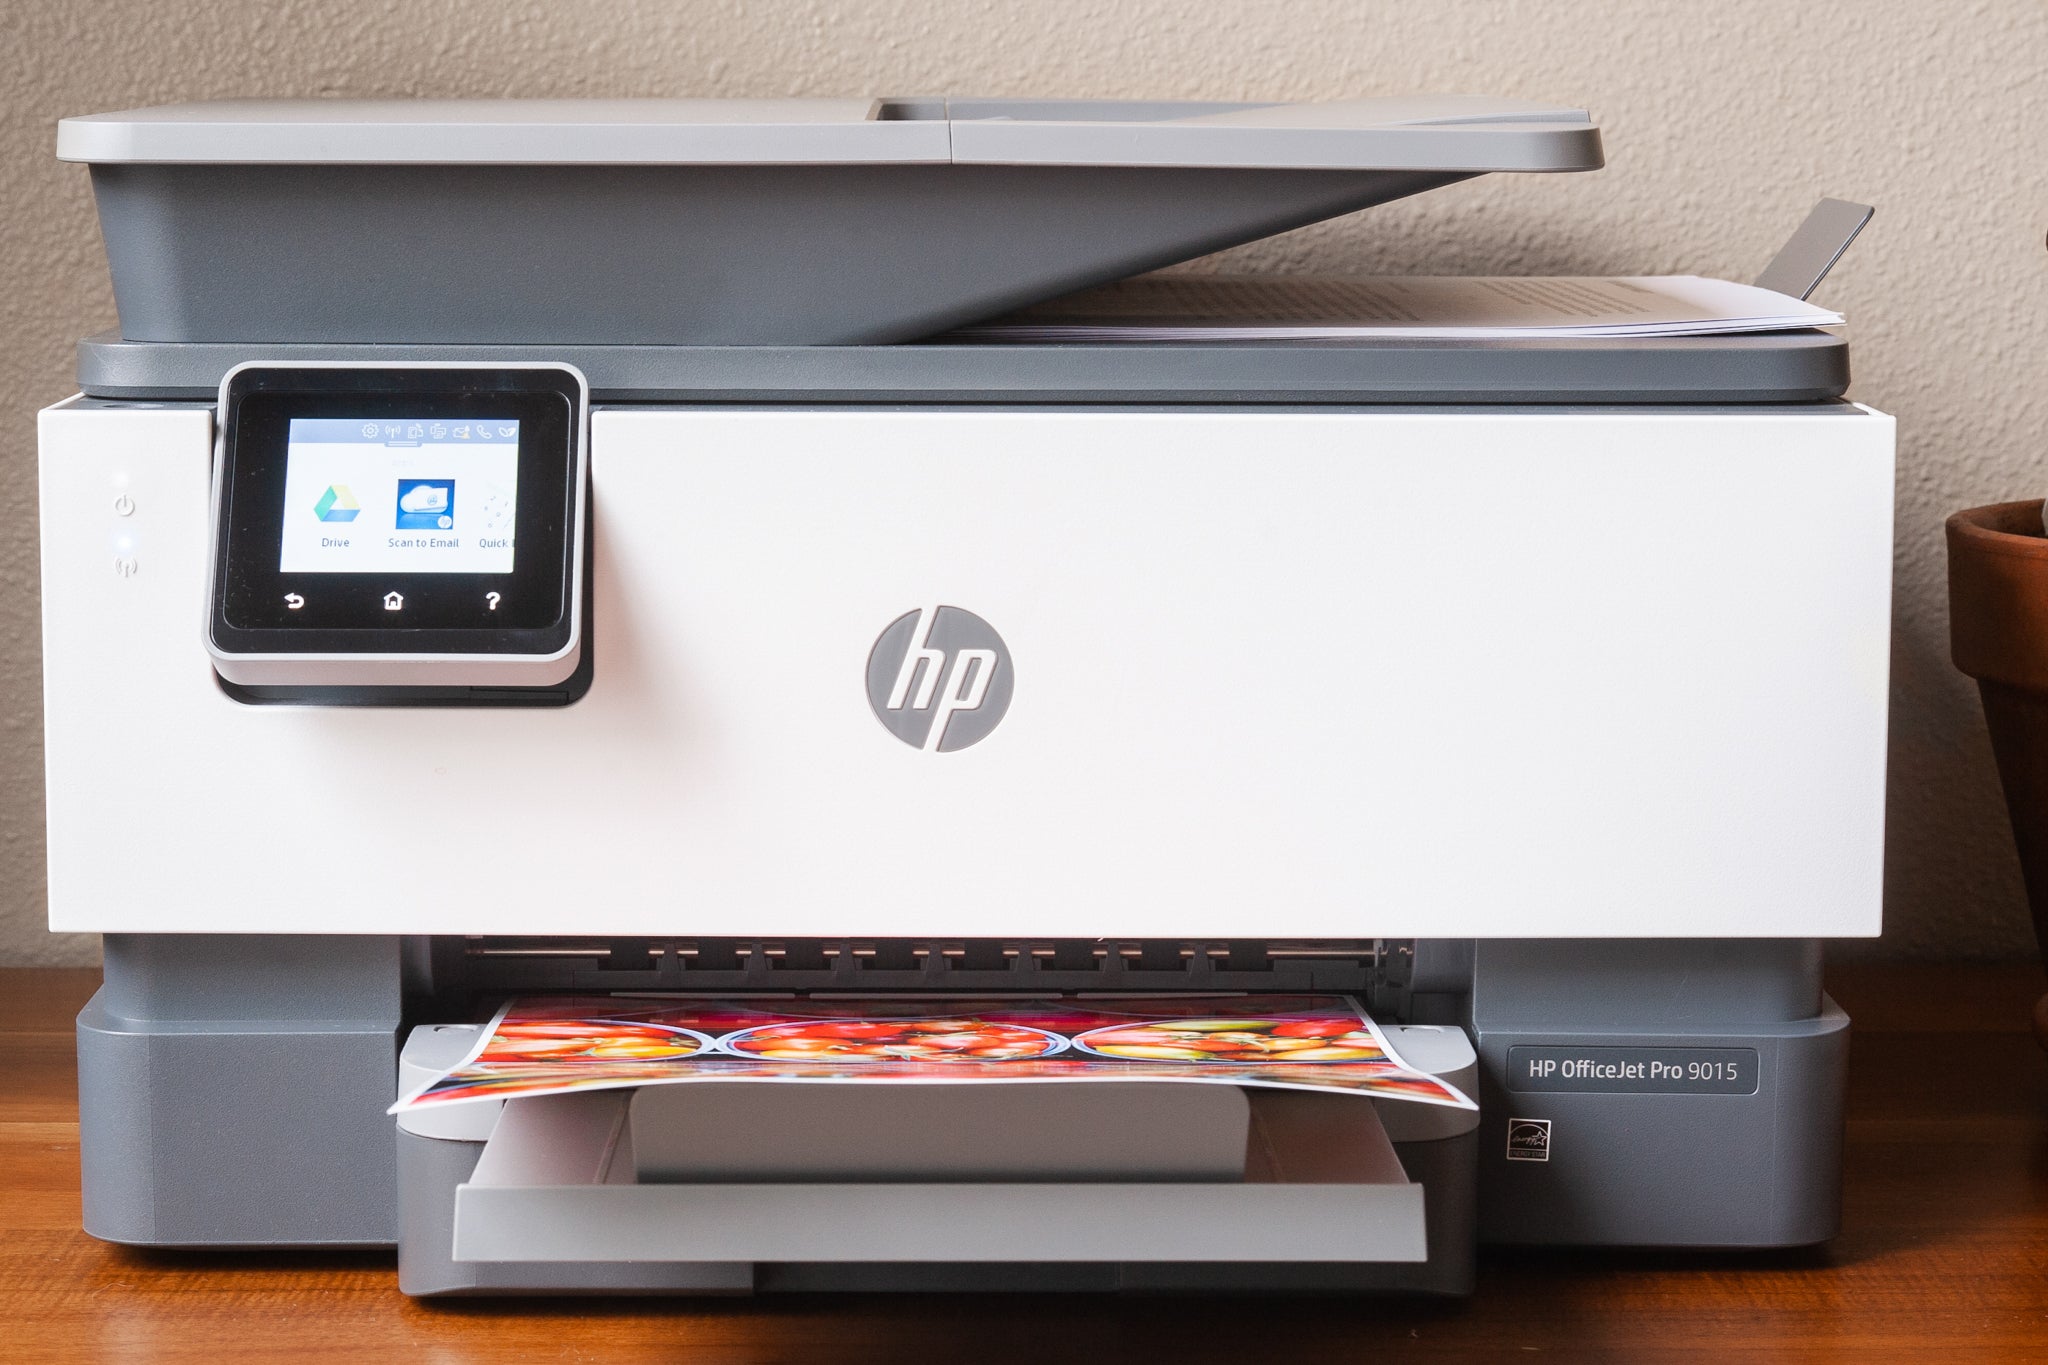 An all-in-one printer with multiple features